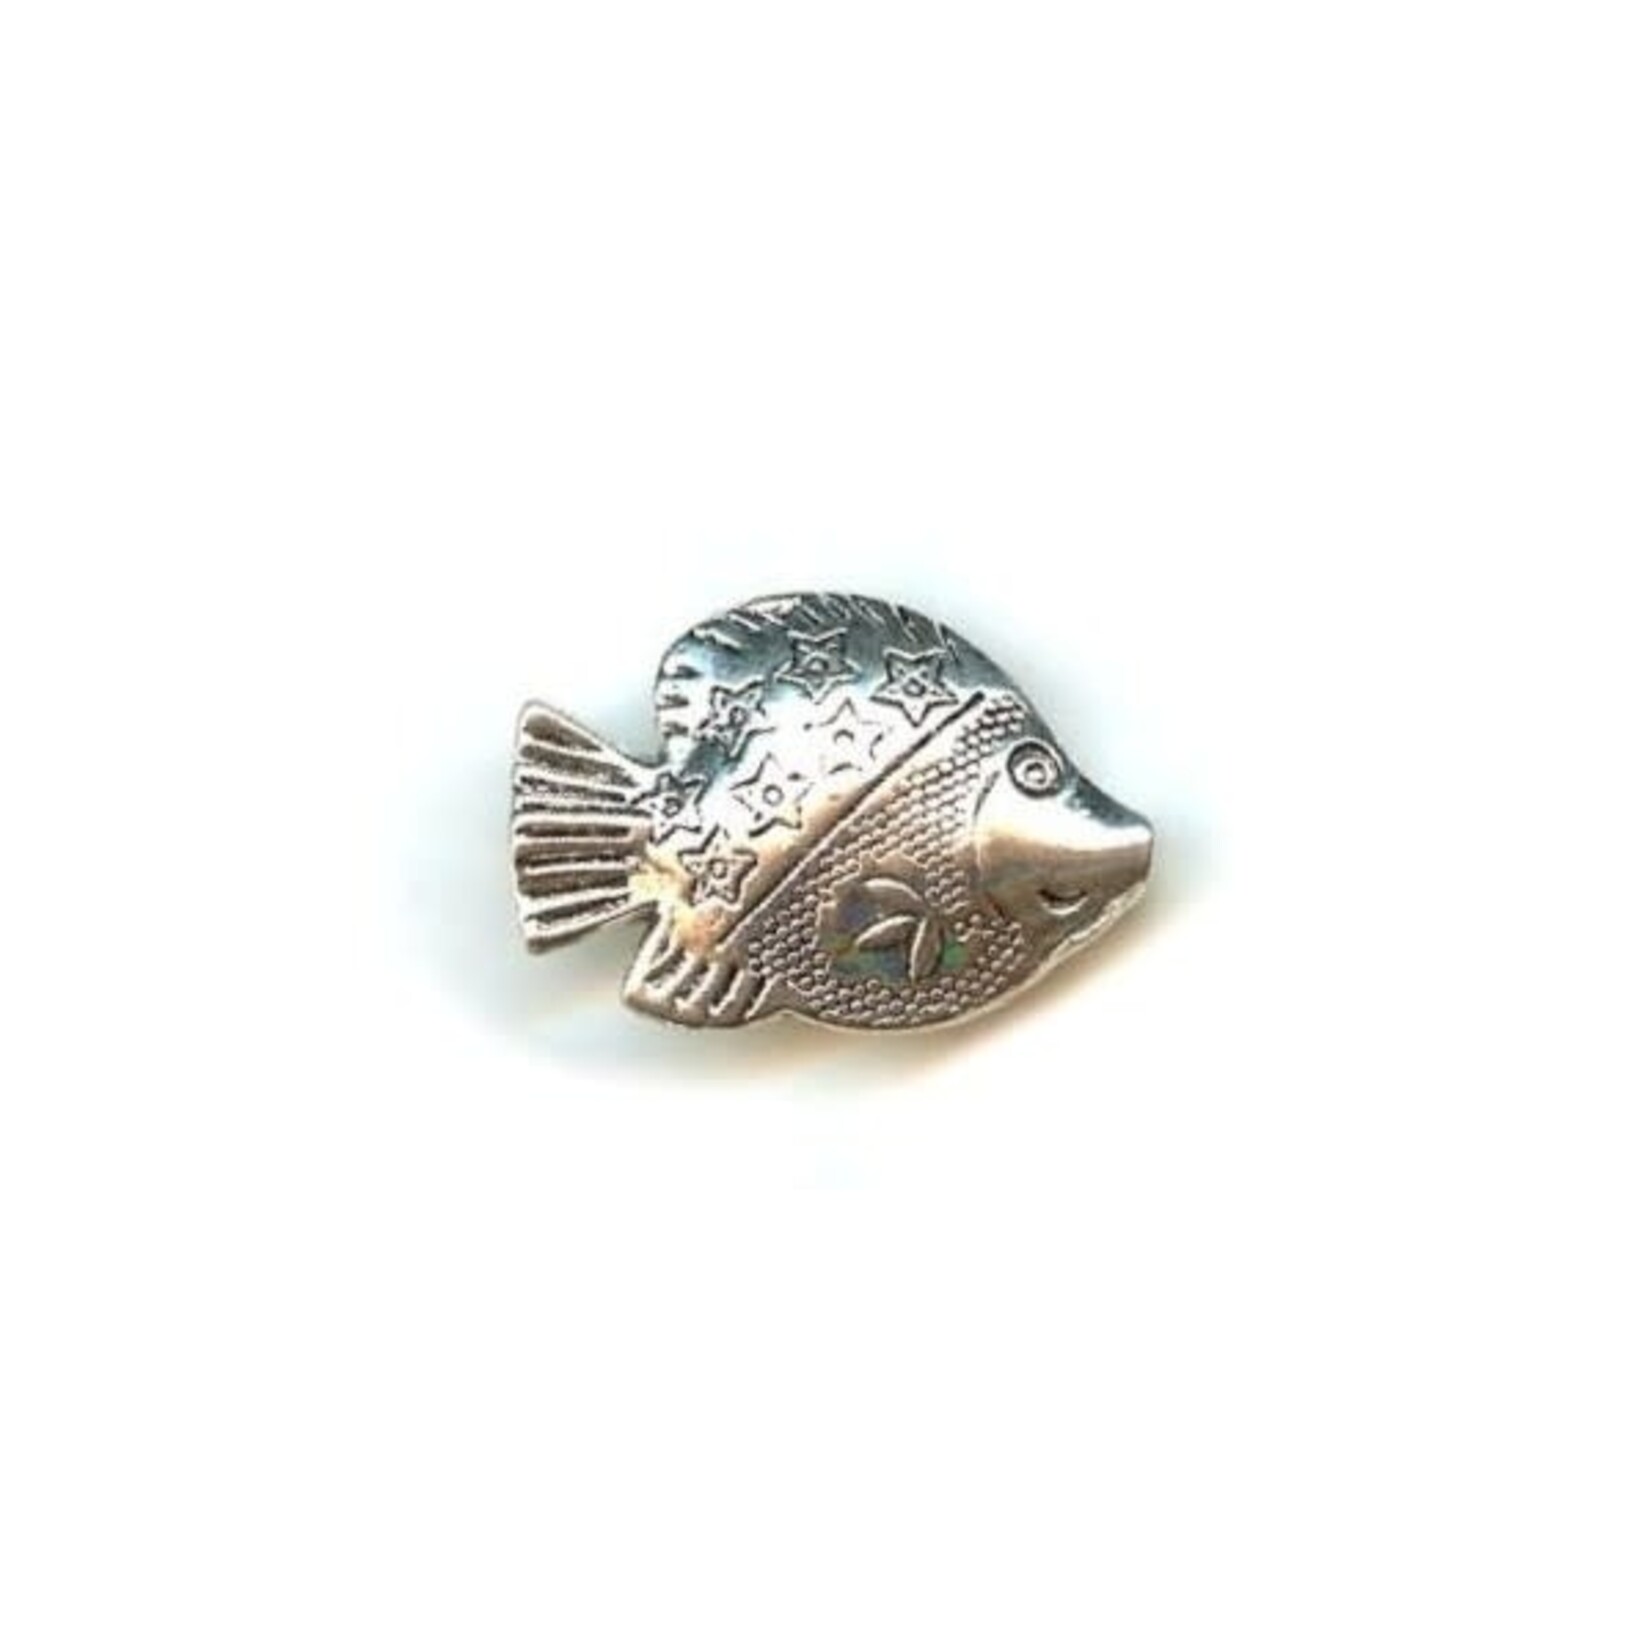 Pewter Fish Mama Bead with Stars Large 31x21mm